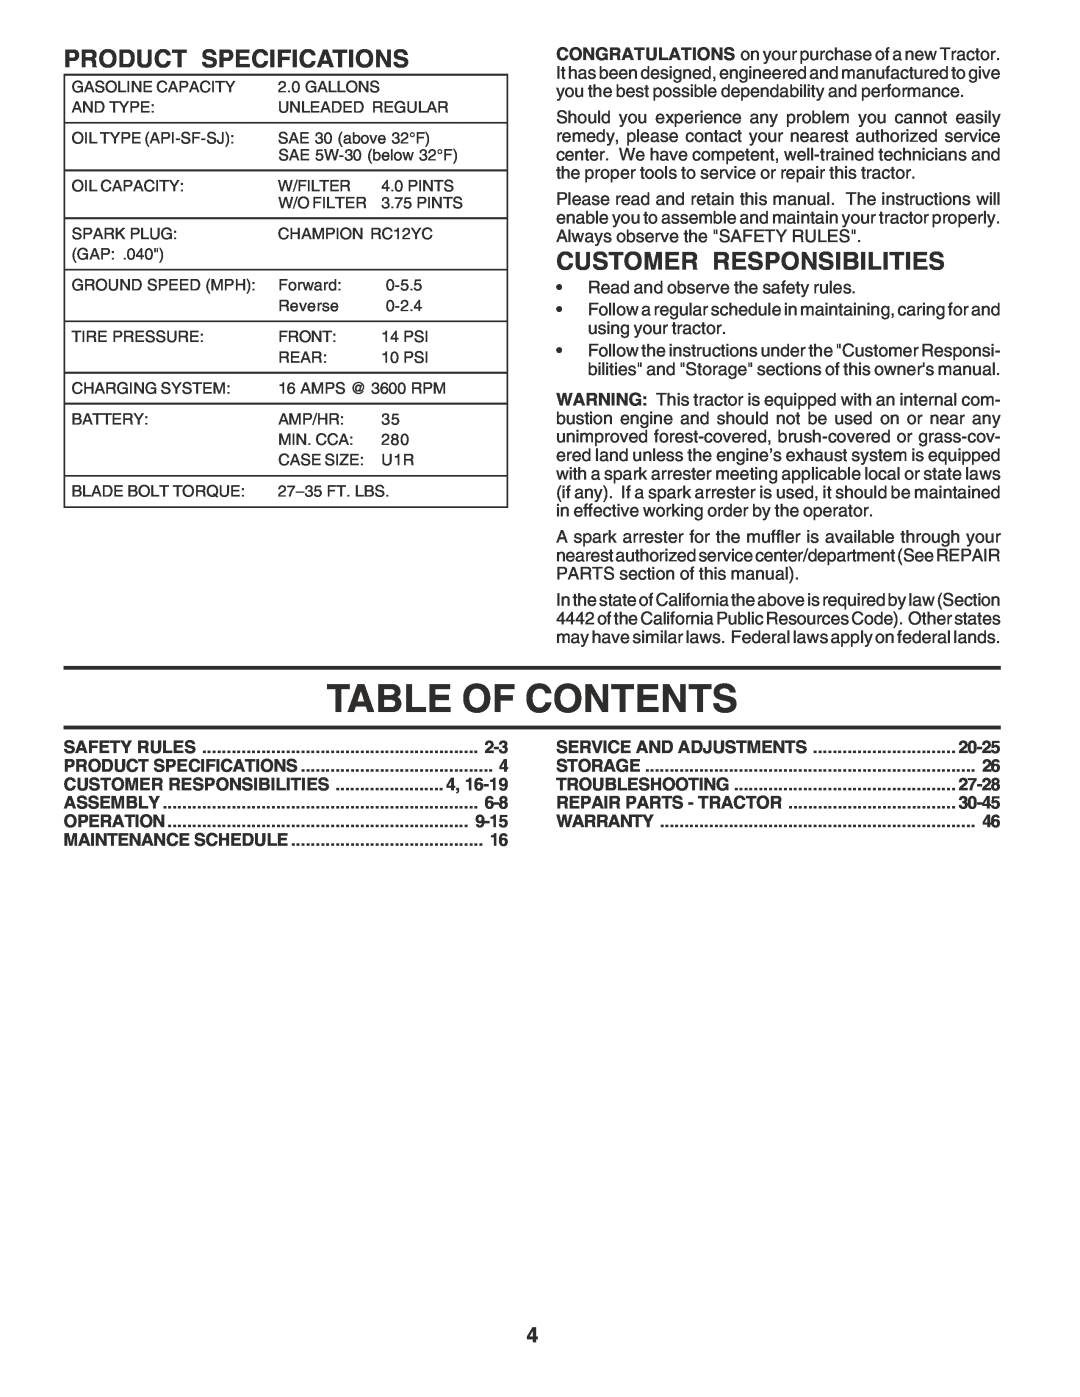 Poulan PR185H42STH owner manual Table Of Contents, Product Specifications, Customer Responsibilities 